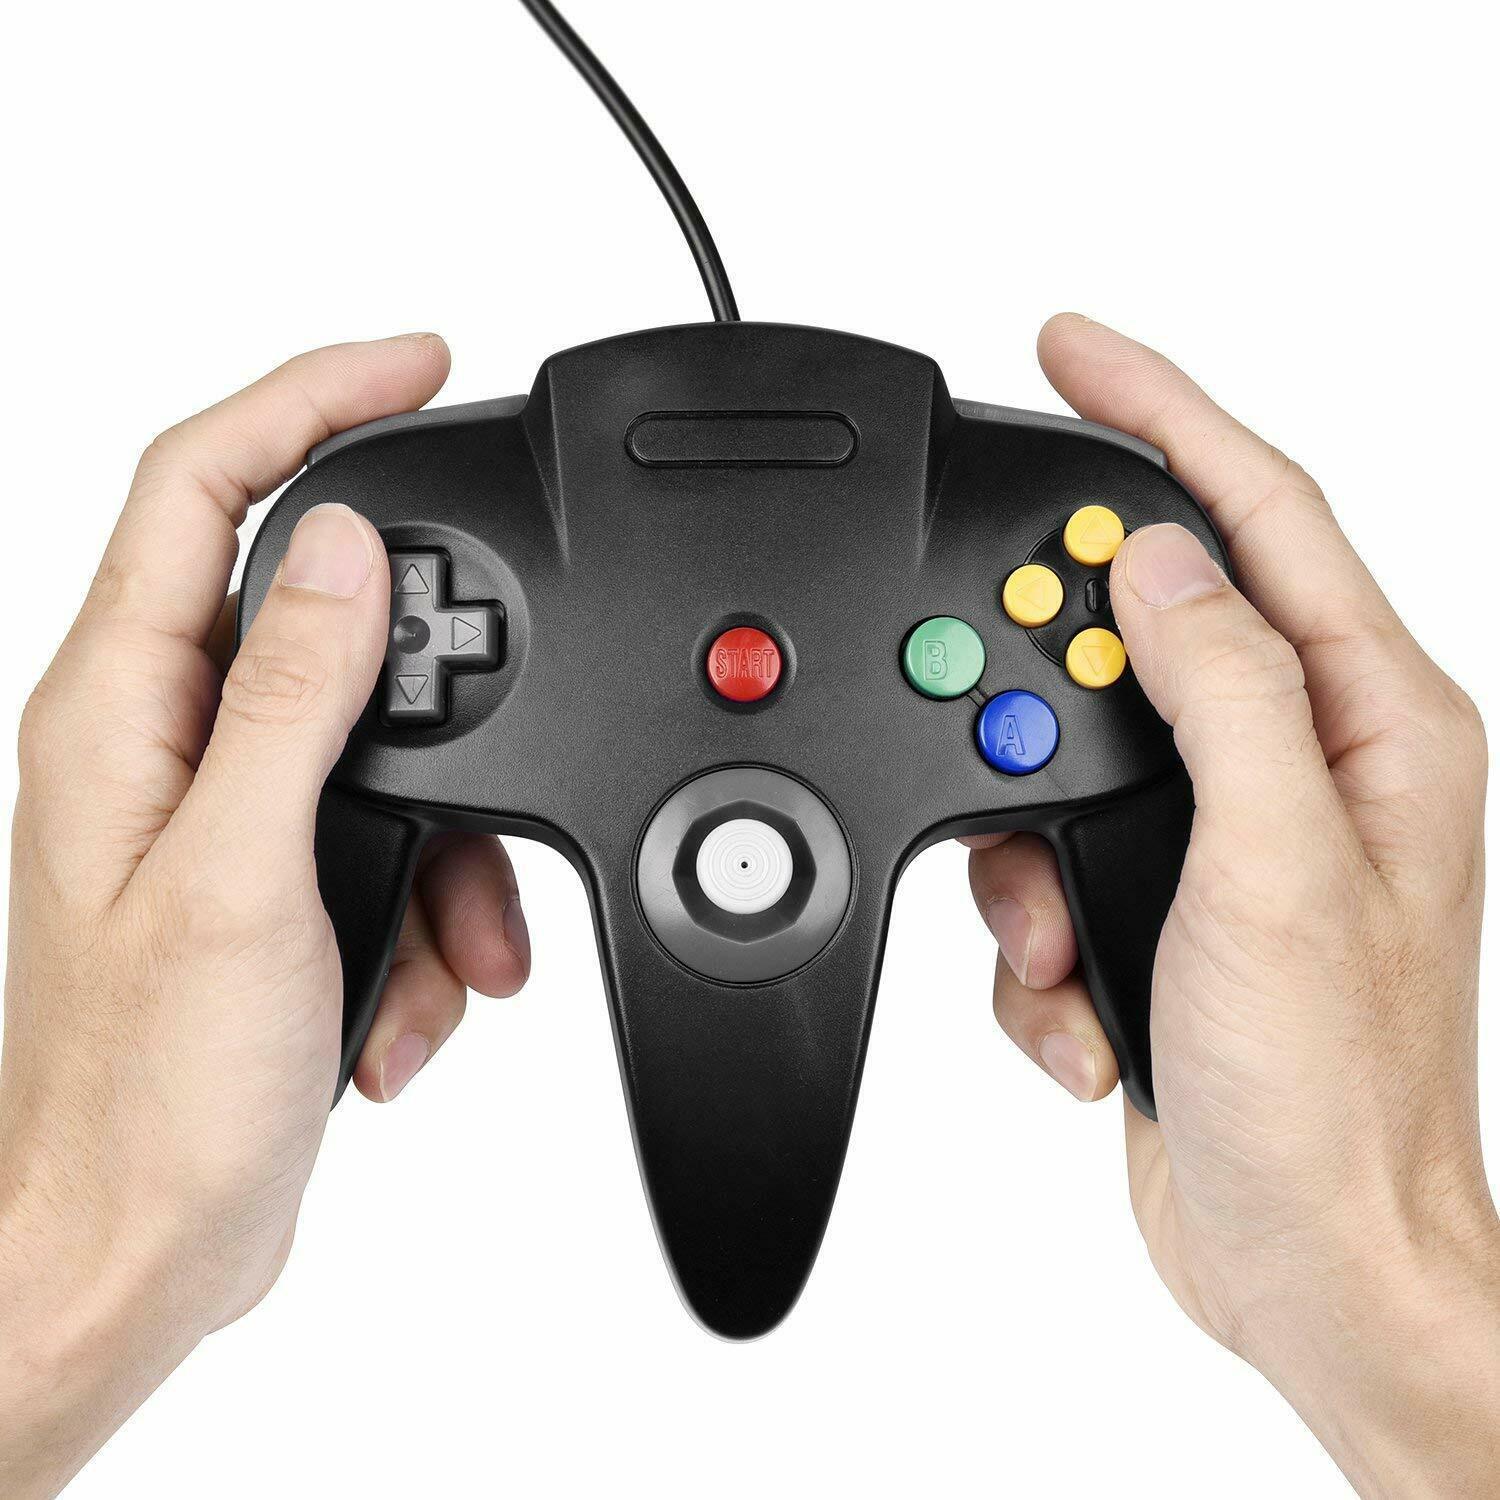 New Nintendo 64 N64 games classic gamepad controllers for USB to PC